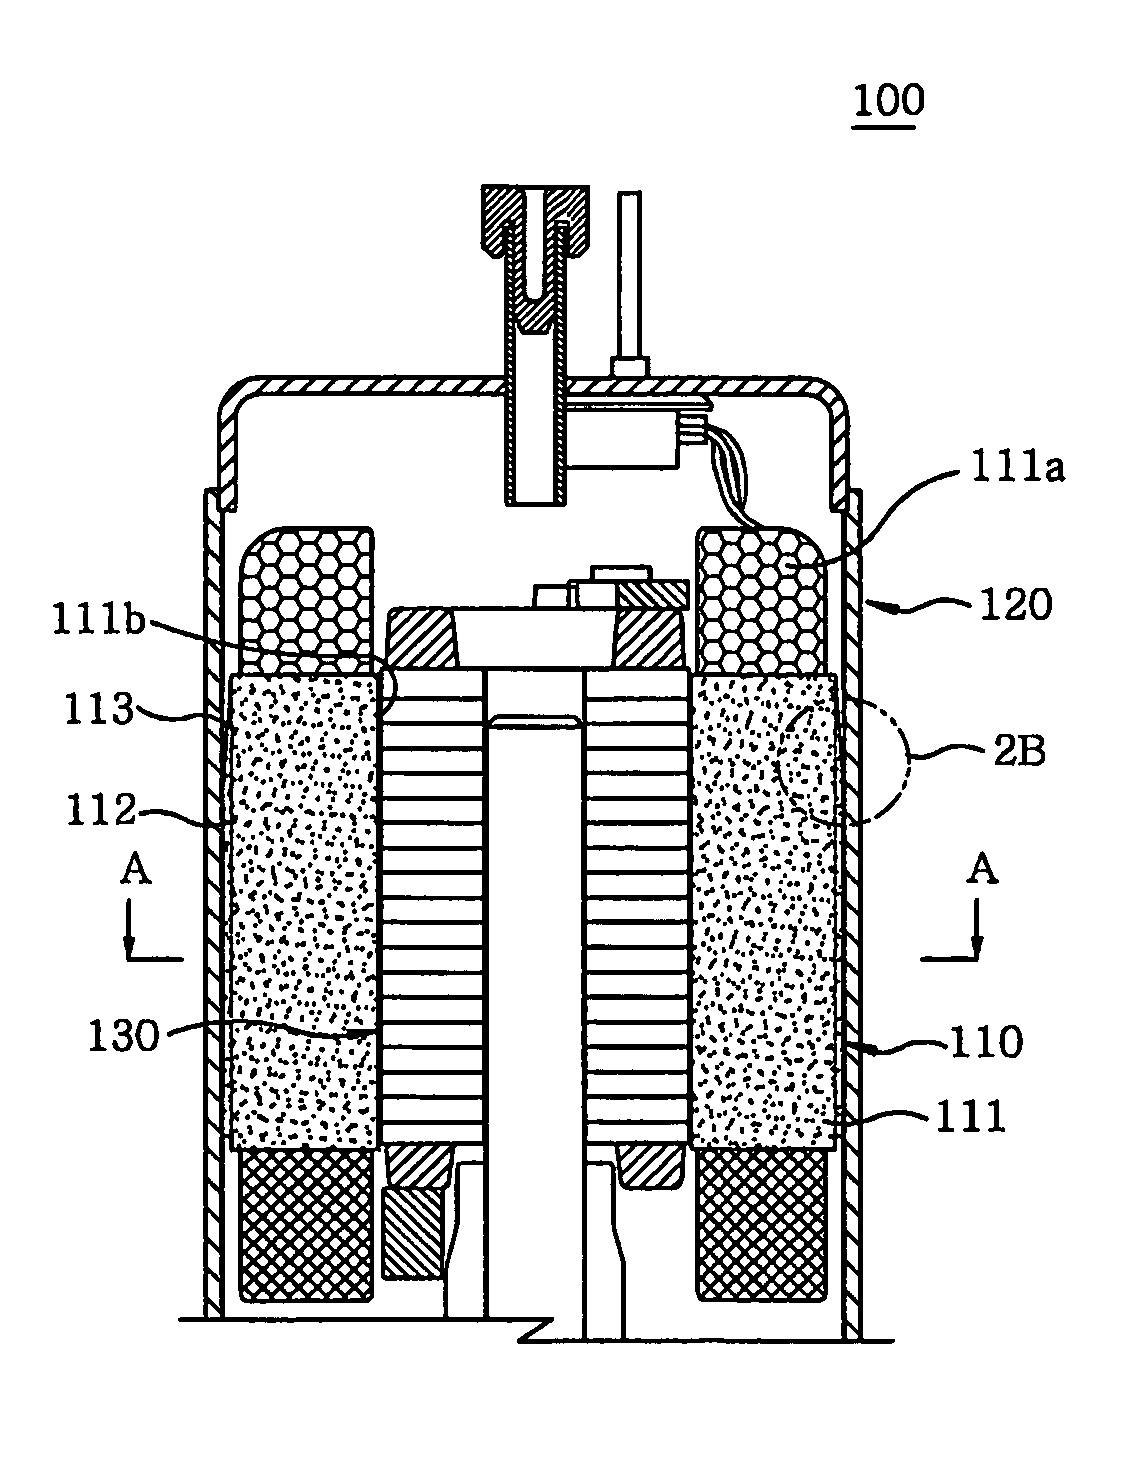 Motor having a stator and a rotor made of soft magnetic powder material